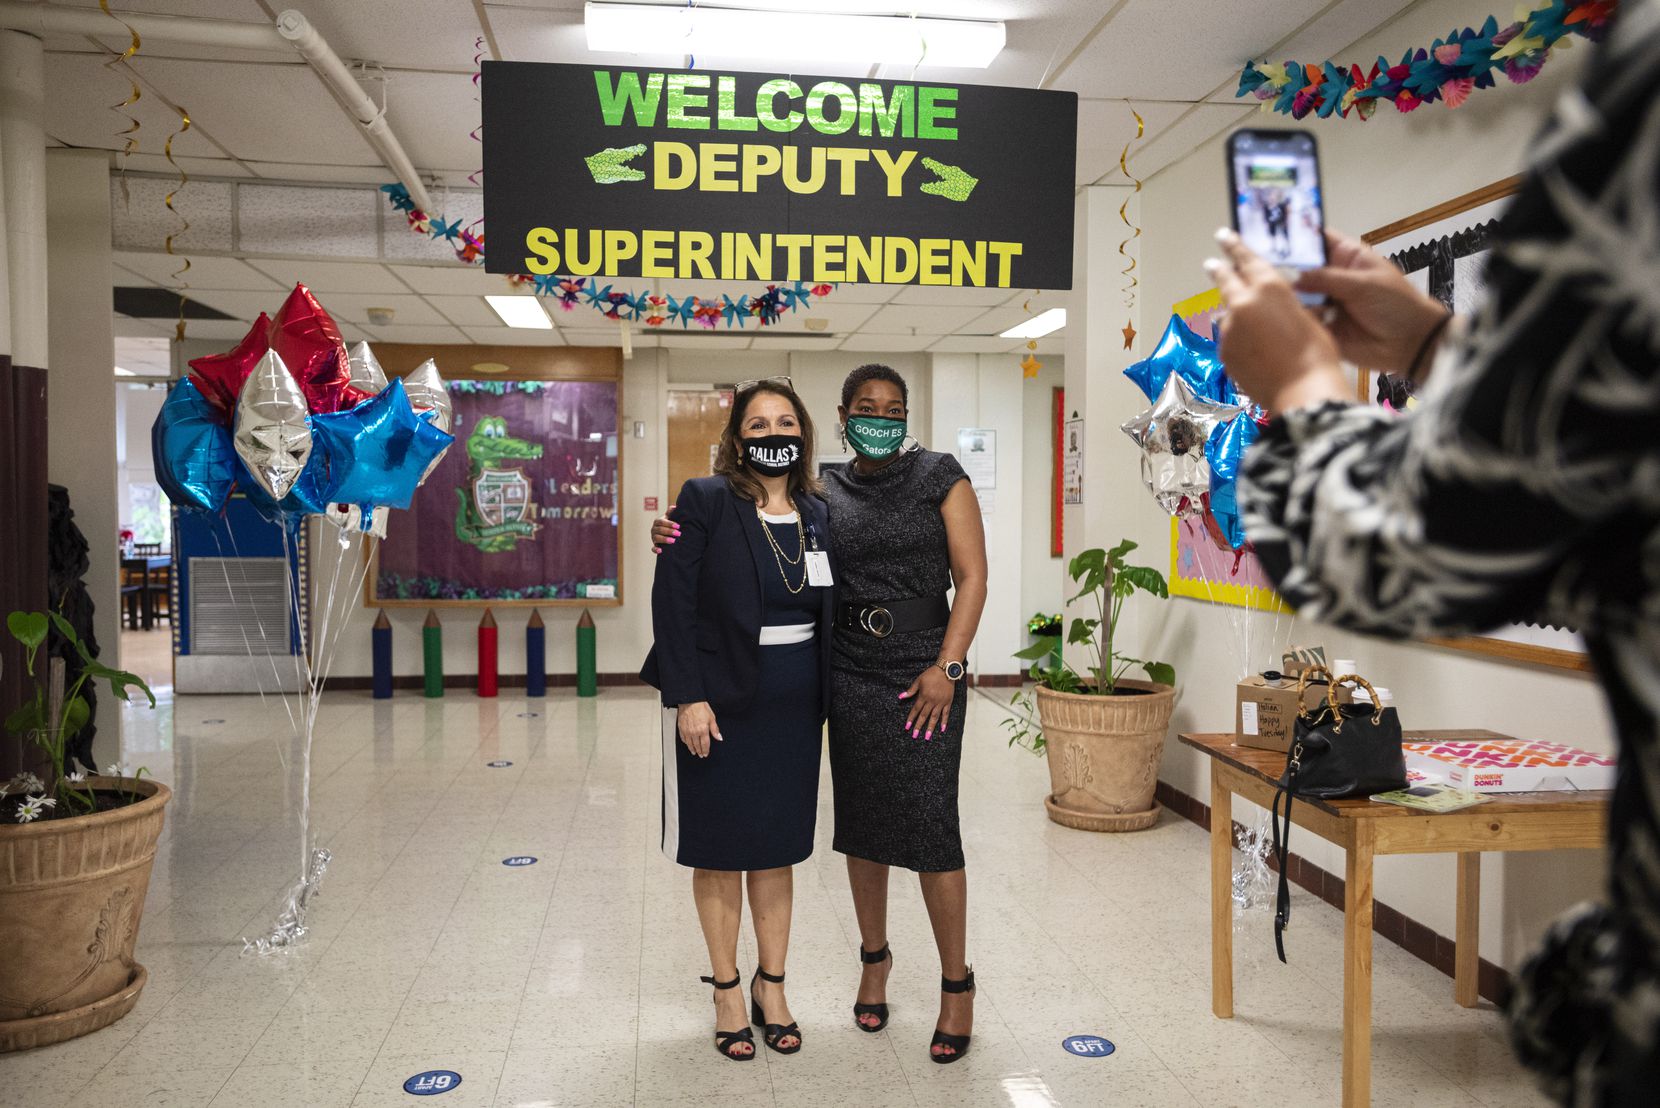 A staff member photographed Susana Cordova (left), DISD deputy superintendent, with principal Kermange Johnson before Cordova left Tom Gooch Elementary School for the next stop on her visits to three campuses that day.